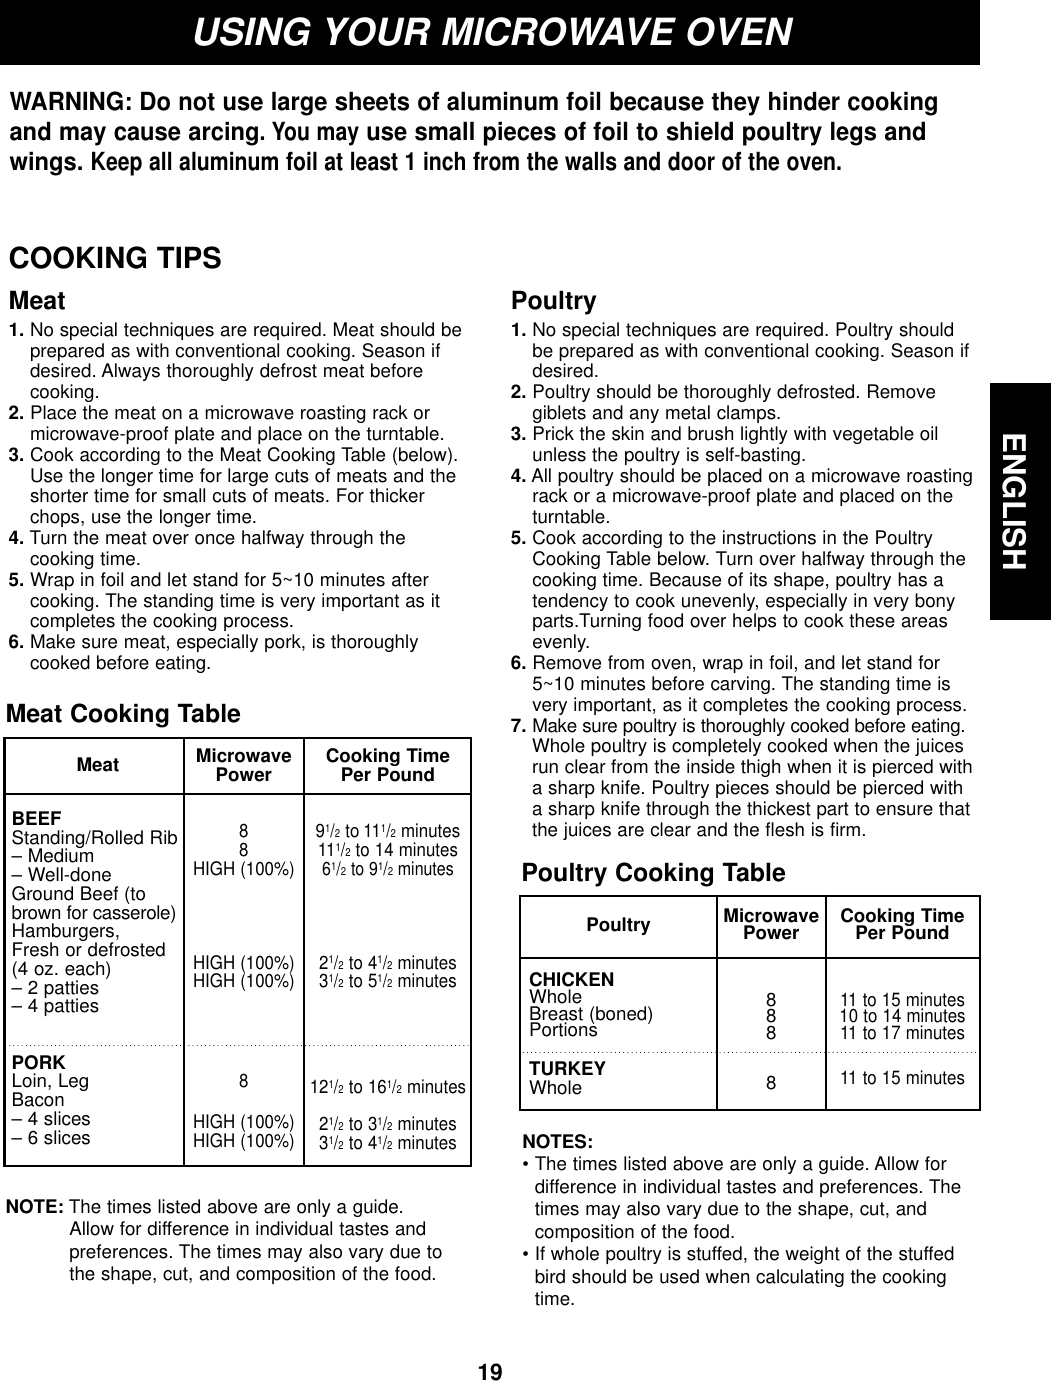 ENGLISH19Meat1. No special techniques are required. Meat should beprepared as with conventional cooking. Season ifdesired. Always thoroughly defrost meat beforecooking.2. Place the meat on a microwave roasting rack ormicrowave-proof plate and place on the turntable.3. Cook according to the Meat Cooking Table (below).Use the longer time for large cuts of meats and theshorter time for small cuts of meats. For thickerchops, use the longer time.4. Turn the meat over once halfway through thecooking time.5. Wrap in foil and let stand for 5~10 minutes aftercooking. The standing time is very important as itcompletes the cooking process.6. Make sure meat, especially pork, is thoroughlycooked before eating.Poultry1. No special techniques are required. Poultry shouldbe prepared as with conventional cooking. Season ifdesired.2. Poultry should be thoroughly defrosted. Removegiblets and any metal clamps.3. Prick the skin and brush lightly with vegetable oilunless the poultry is self-basting.4. All poultry should be placed on a microwave roastingrack or a microwave-proof plate and placed on theturntable.5. Cook according to the instructions in the PoultryCooking Table below. Turn over halfway through thecooking time. Because of its shape, poultry has atendency to cook unevenly, especially in very bonyparts.Turning food over helps to cook these areasevenly.6. Remove from oven, wrap in foil, and let stand for5~10 minutes before carving. The standing time isvery important, as it completes the cooking process.7. Make sure poultry is thoroughly cooked before eating.Whole poultry is completely cooked when the juicesrun clear from the inside thigh when it is pierced witha sharp knife. Poultry pieces should be pierced witha sharp knife through the thickest part to ensure thatthe juices are clear and the flesh is firm.USING YOUR MICROWAVE OVENWARNING: Do not use large sheets of aluminum foil because they hinder cookingand may cause arcing. You mayuse small pieces of foil to shield poultry legs andwings. Keep all aluminum foil at least 1 inch from the walls and door of the oven.BEEFStanding/Rolled Rib– Medium– Well-doneGround Beef (tobrown for casserole)Hamburgers,Fresh or defrosted(4 oz. each)– 2 patties– 4 pattiesPORKLoin, LegBacon– 4 slices– 6 slicesMicrowavePower88HIGH (100%)HIGH (100%)HIGH (100%)8HIGH (100%)HIGH (100%)Cooking TimePer Pound91/2to 111/2minutes111/2to 14 minutes 61/2to 91/2minutes21/2to 41/2minutes31/2to 51/2minutes121/2to 161/2minutes21/2to 31/2minutes31/2to 41/2minutesMeat Cooking TableCHICKENWholeBreast (boned)PortionsTURKEYWholeMicrowavePower8888Cooking TimePer Pound11 to 15 minutes10 to 14 minutes11 to 17 minutes11 to 15 minutesPoultry Cooking TableNOTES:• The times listed above are only a guide. Allow for difference in individual tastes and preferences. Thetimes may also vary due to the shape, cut, and composition of the food.• If whole poultry is stuffed, the weight of the stuffedbird should be used when calculating the cookingtime.NOTE: The times listed above are only a guide. Allow for difference in individual tastes andpreferences. The times may also vary due tothe shape, cut, and composition of the food.PoultryCOOKING TIPSMeat